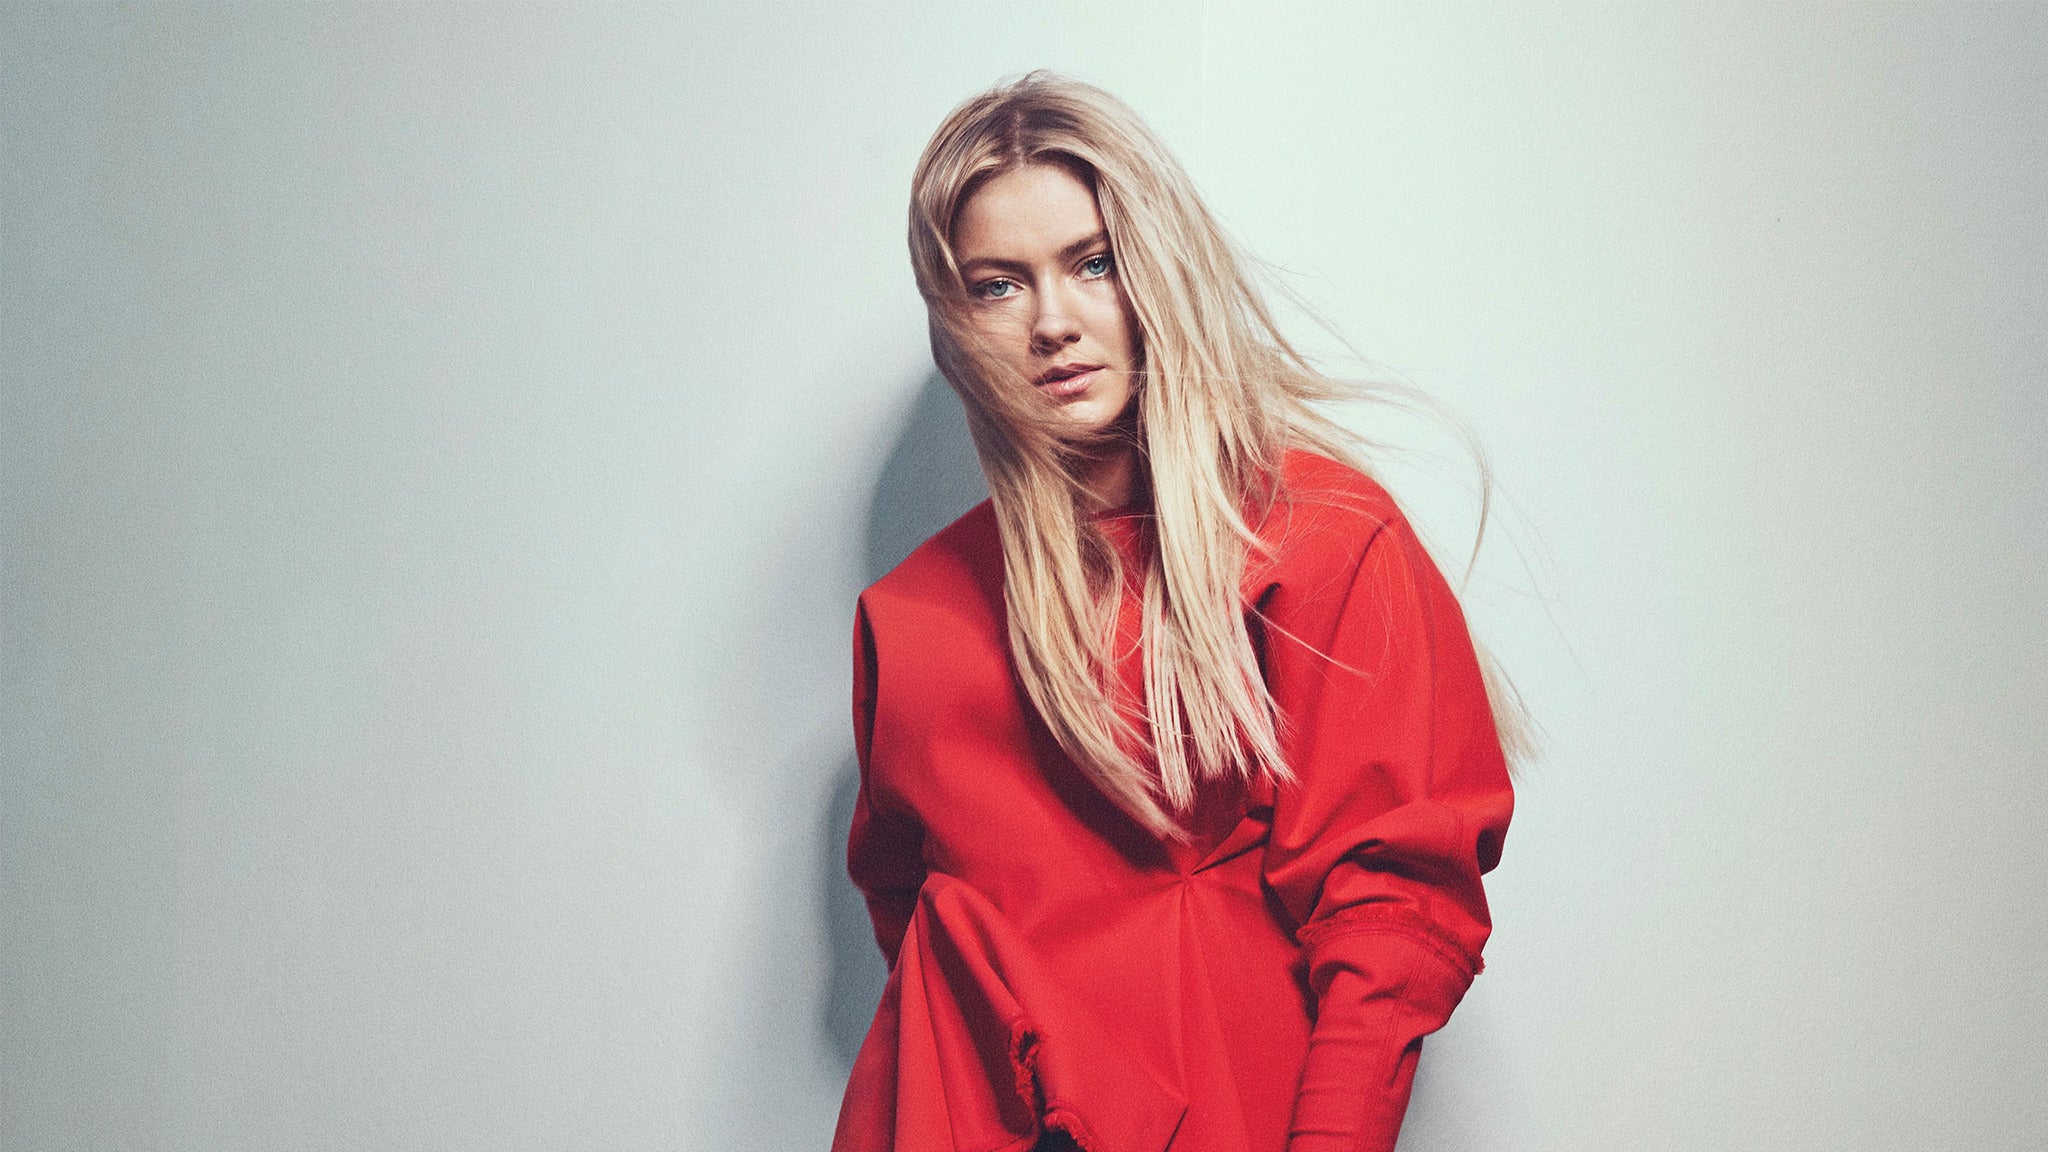 Astrid S in Columbus promo photo for PromoWest presale offer code